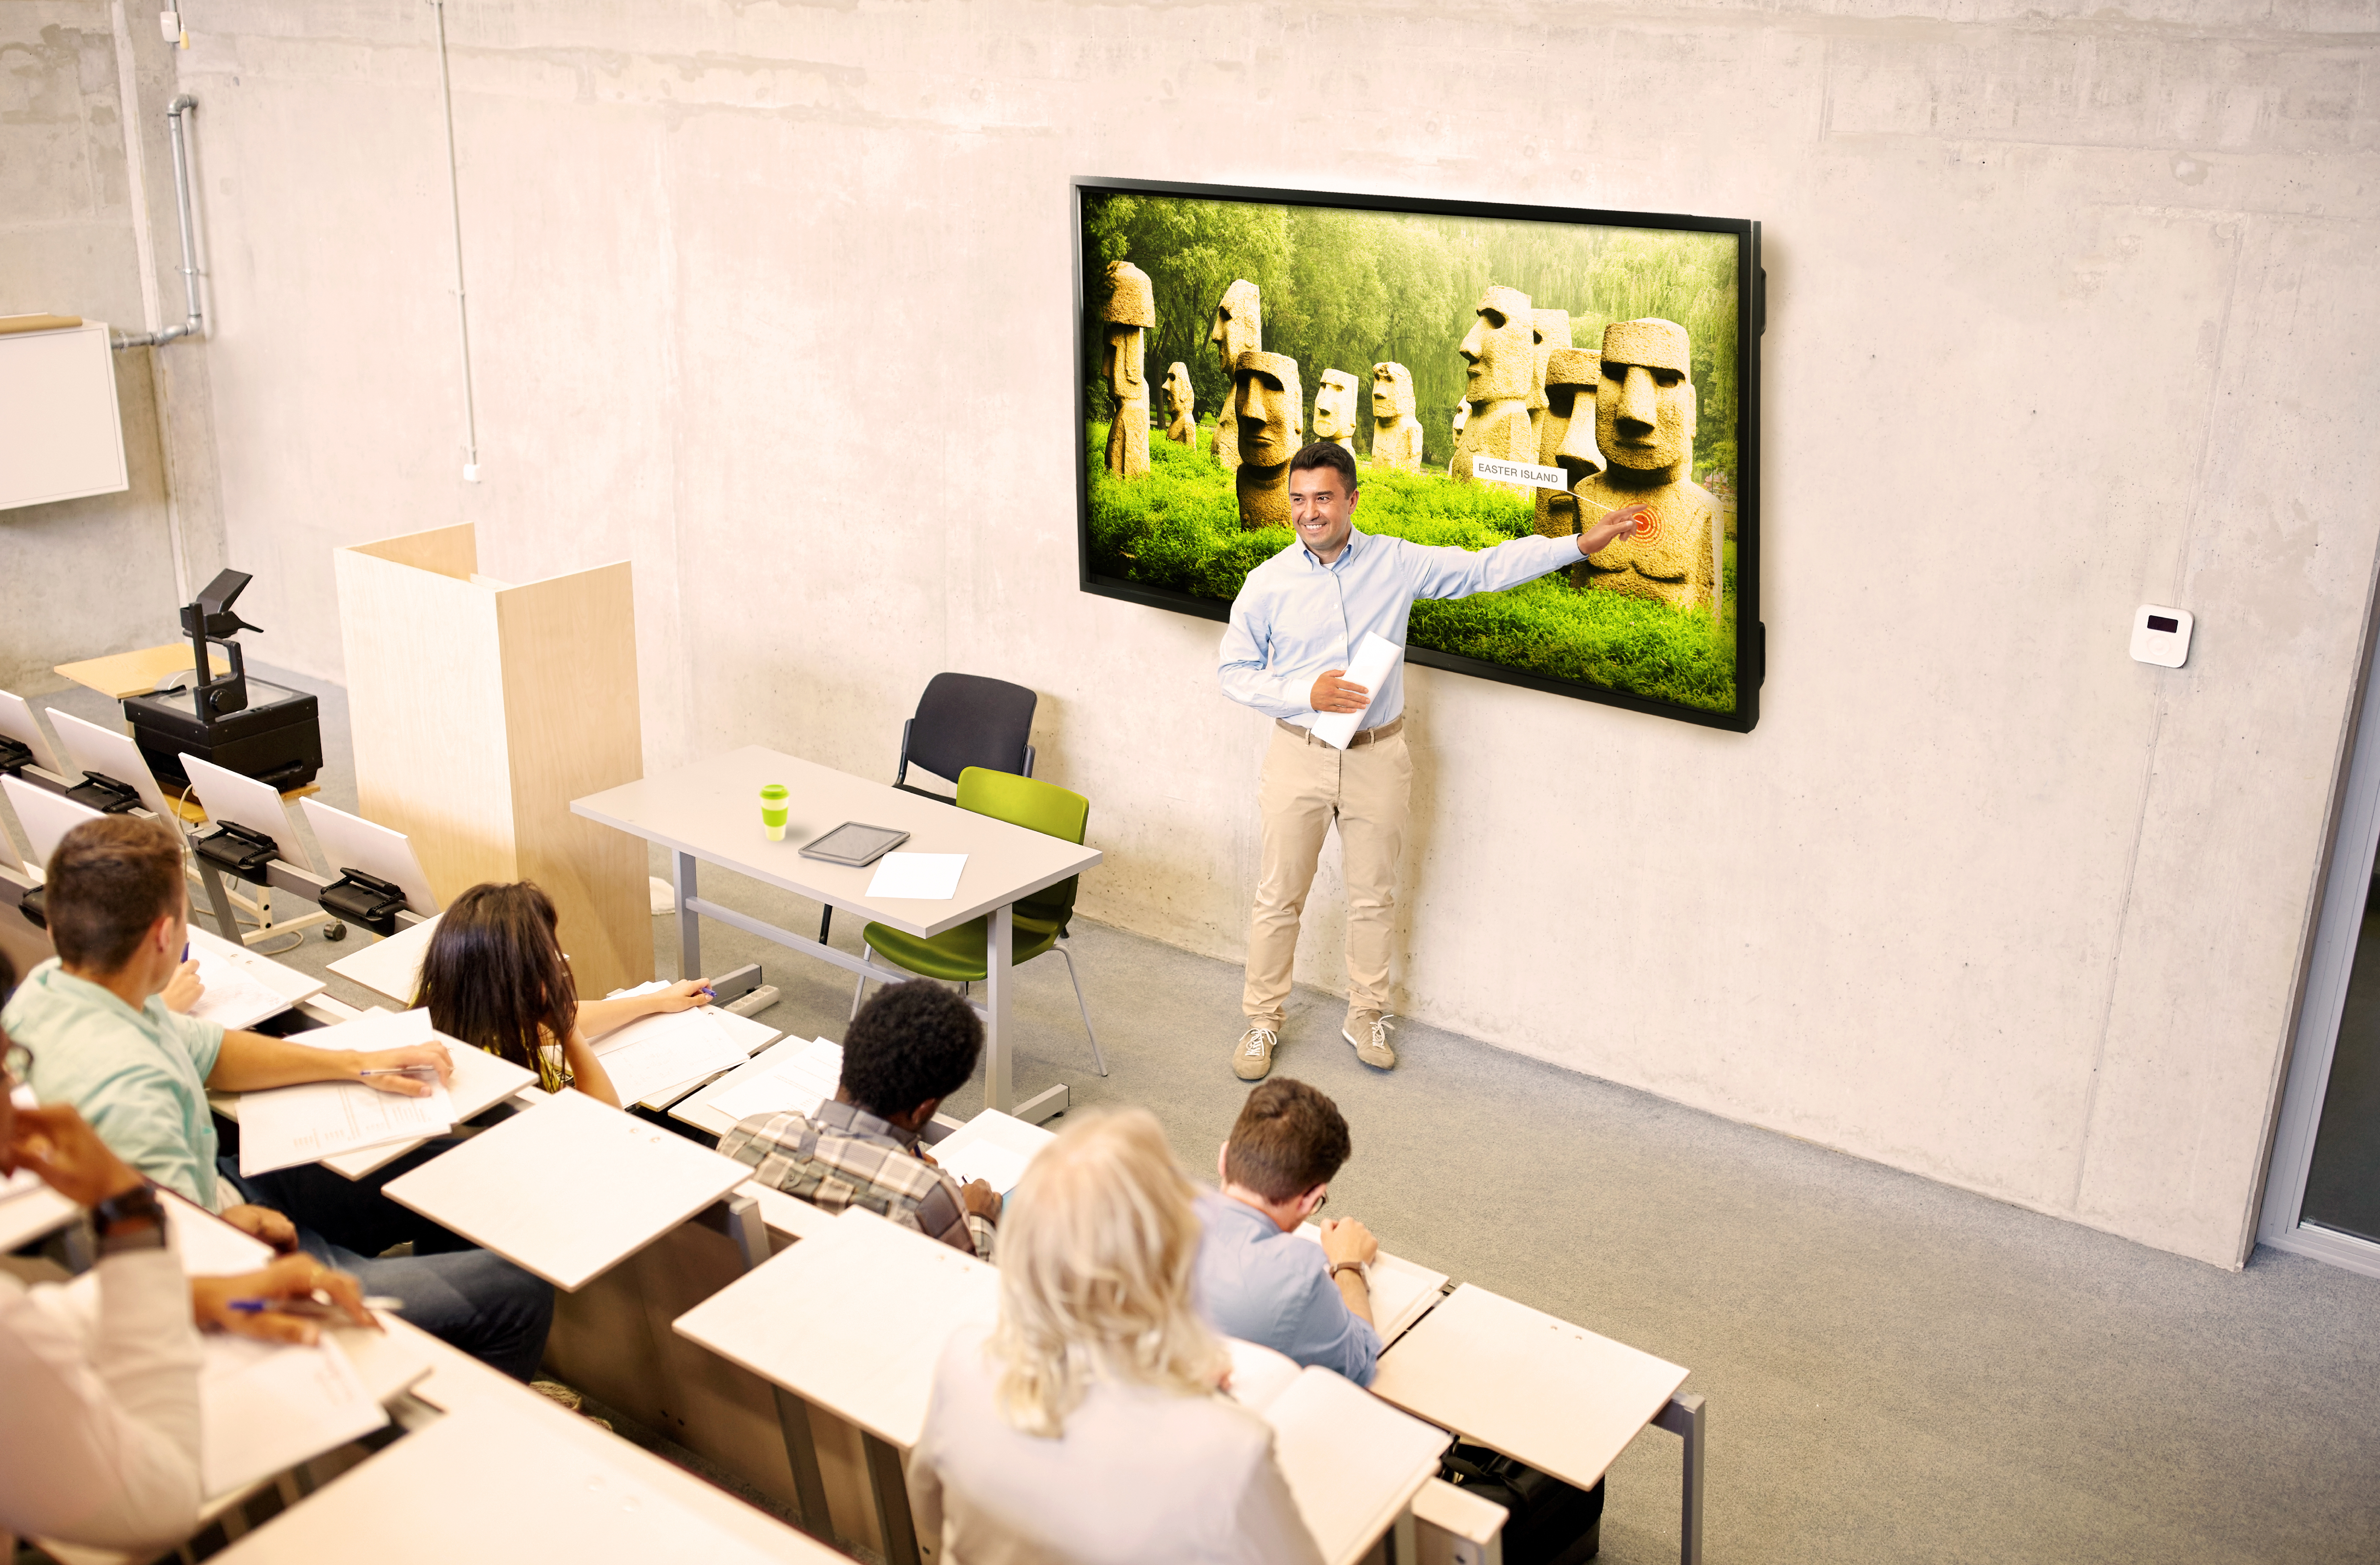 Why Video Walls Are the Future of Display Technology